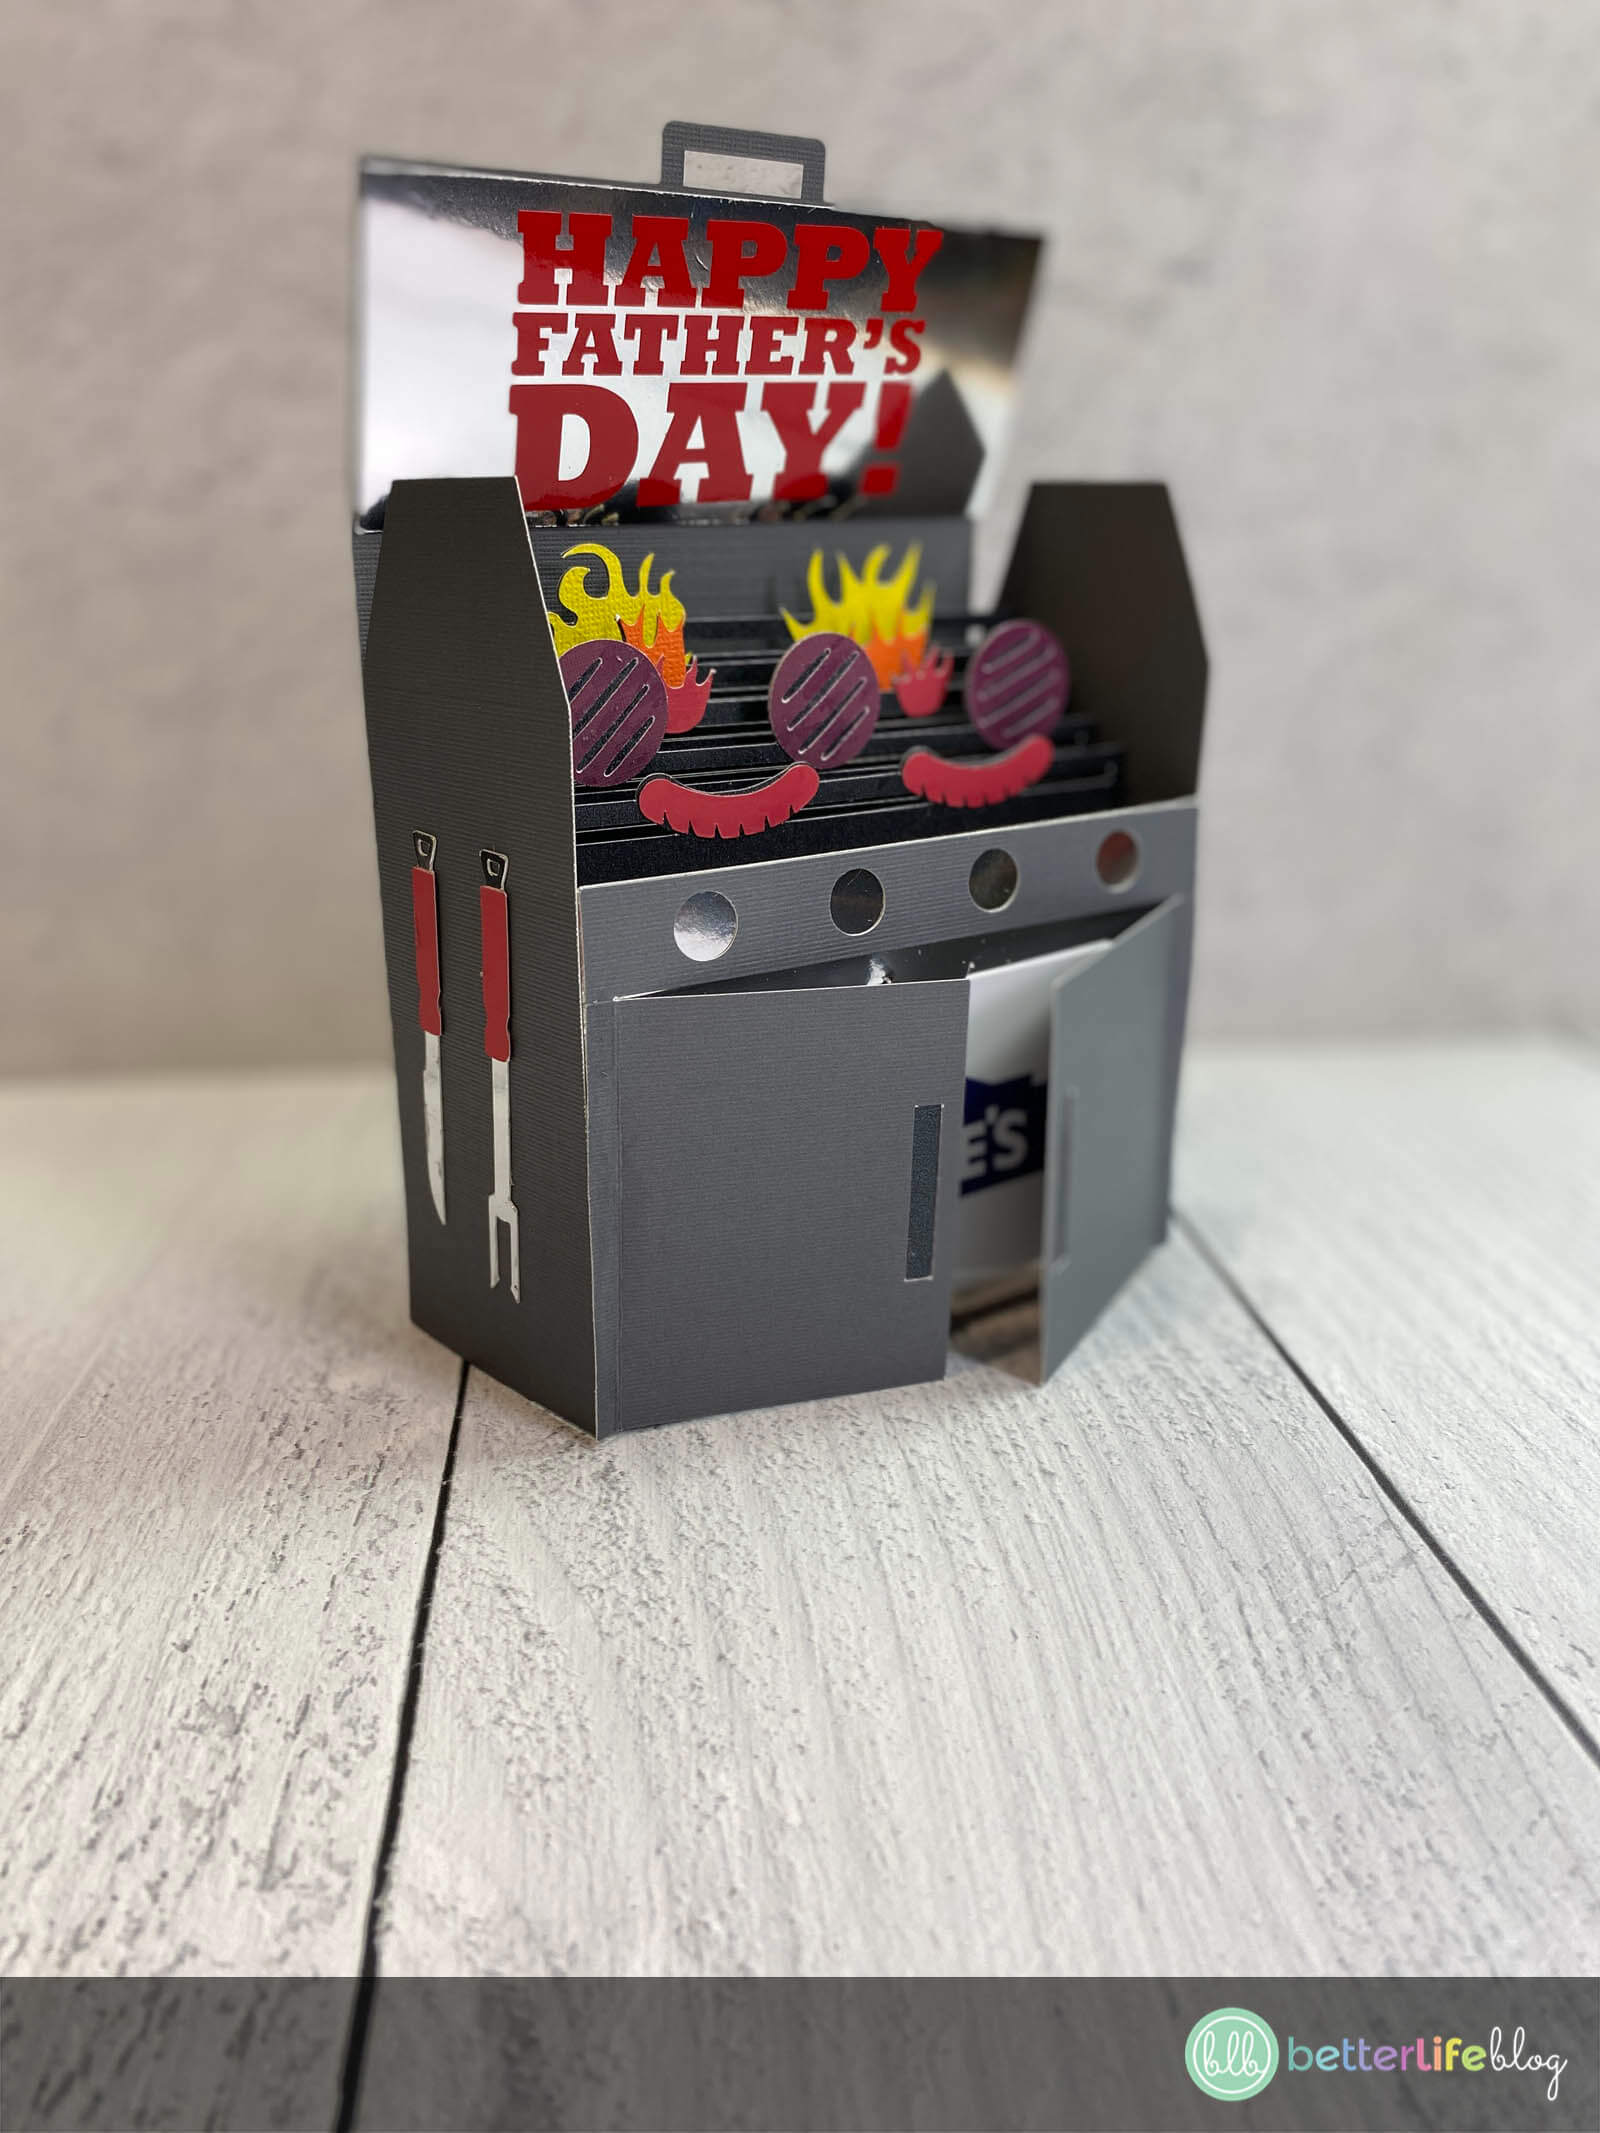 This Pop Up Father’s Day BBQ Card will be a huge hit with dad – and guess what? It’s made using a Cricut machine! Take a look at my step-by-step tutorial so that you can surprise dad with this homemade craft!